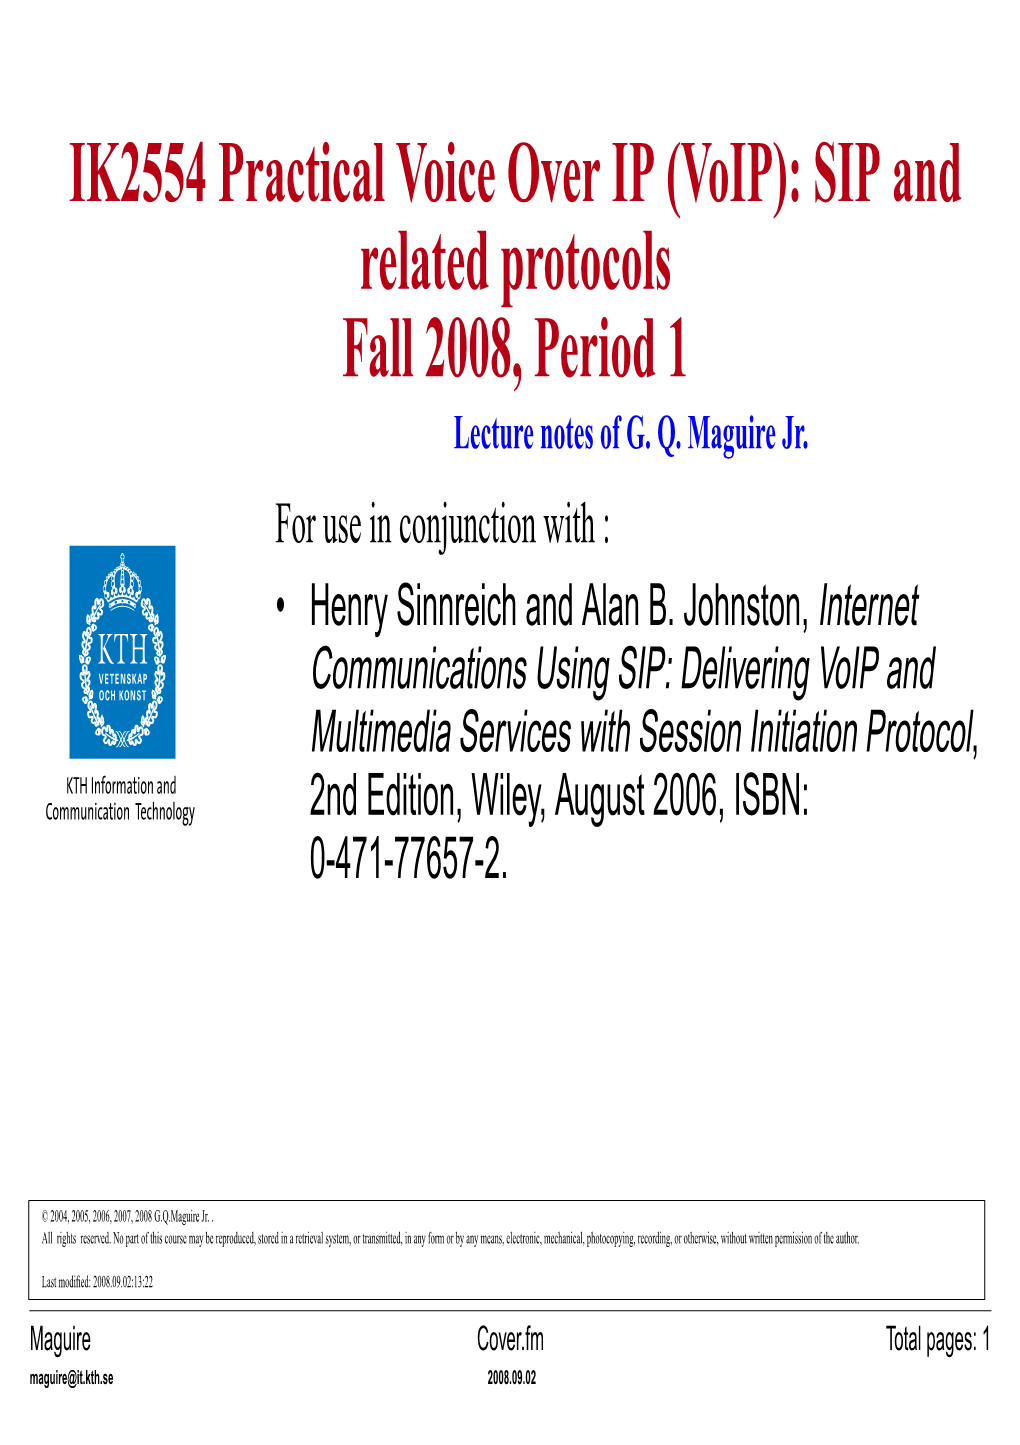 Voip): SIP and Related Protocols Fall 2008, Period 1 Communicationslecture Notesusing of SIP:G